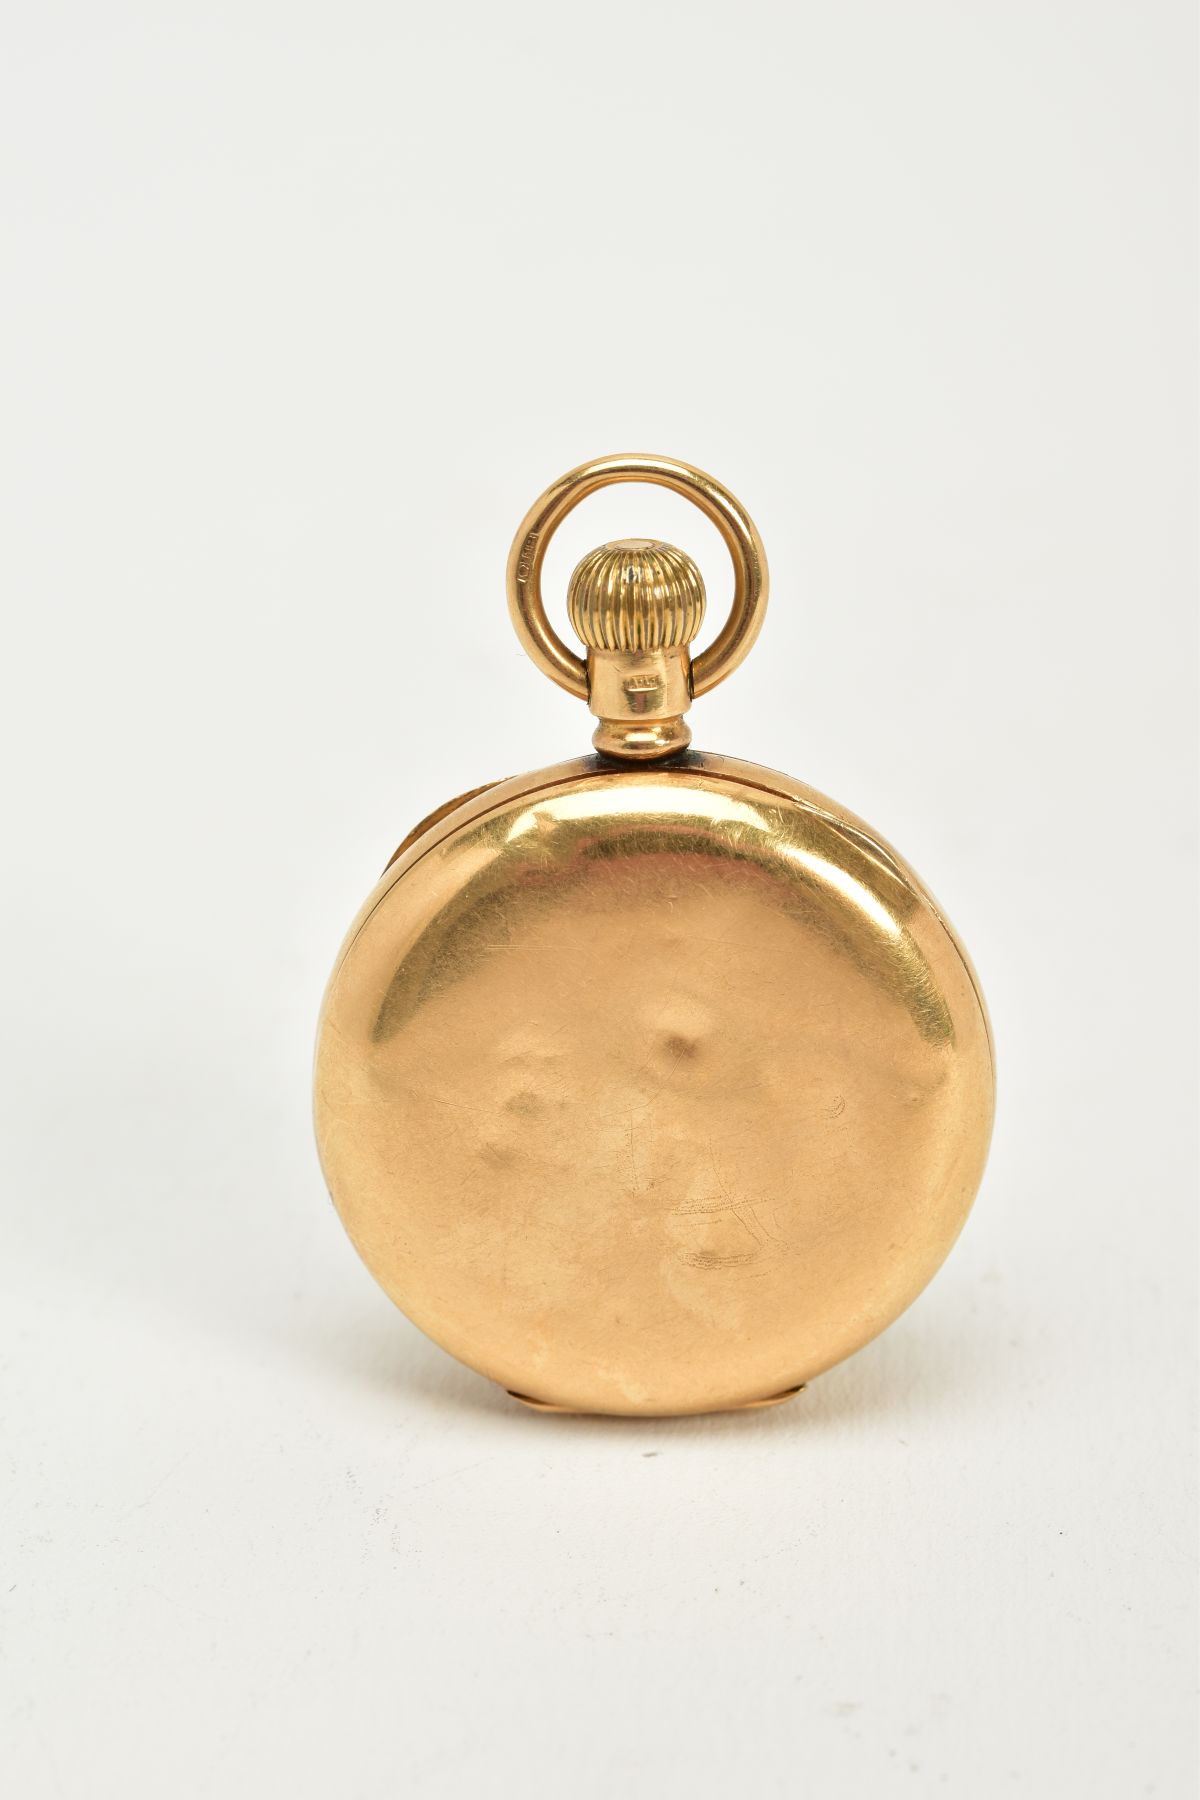 AN 18CT GOLD RED CROSS OPEN FACED POCKET WATCH, white enamel dial signed 'Audrey Reg', Roman - Image 4 of 7